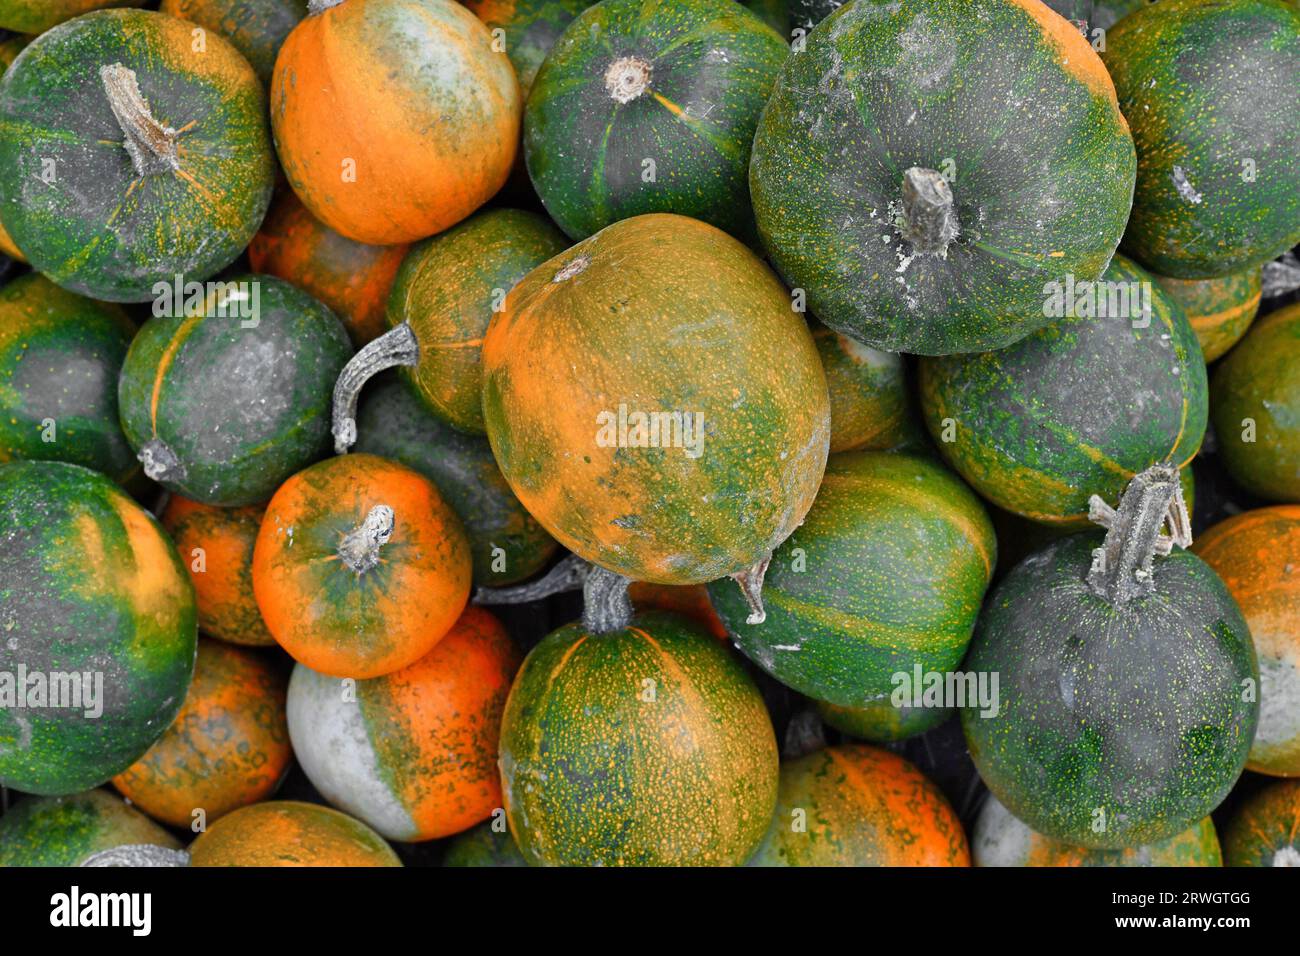 Pile of green and yellow Rondini Gem squashes Stock Photo